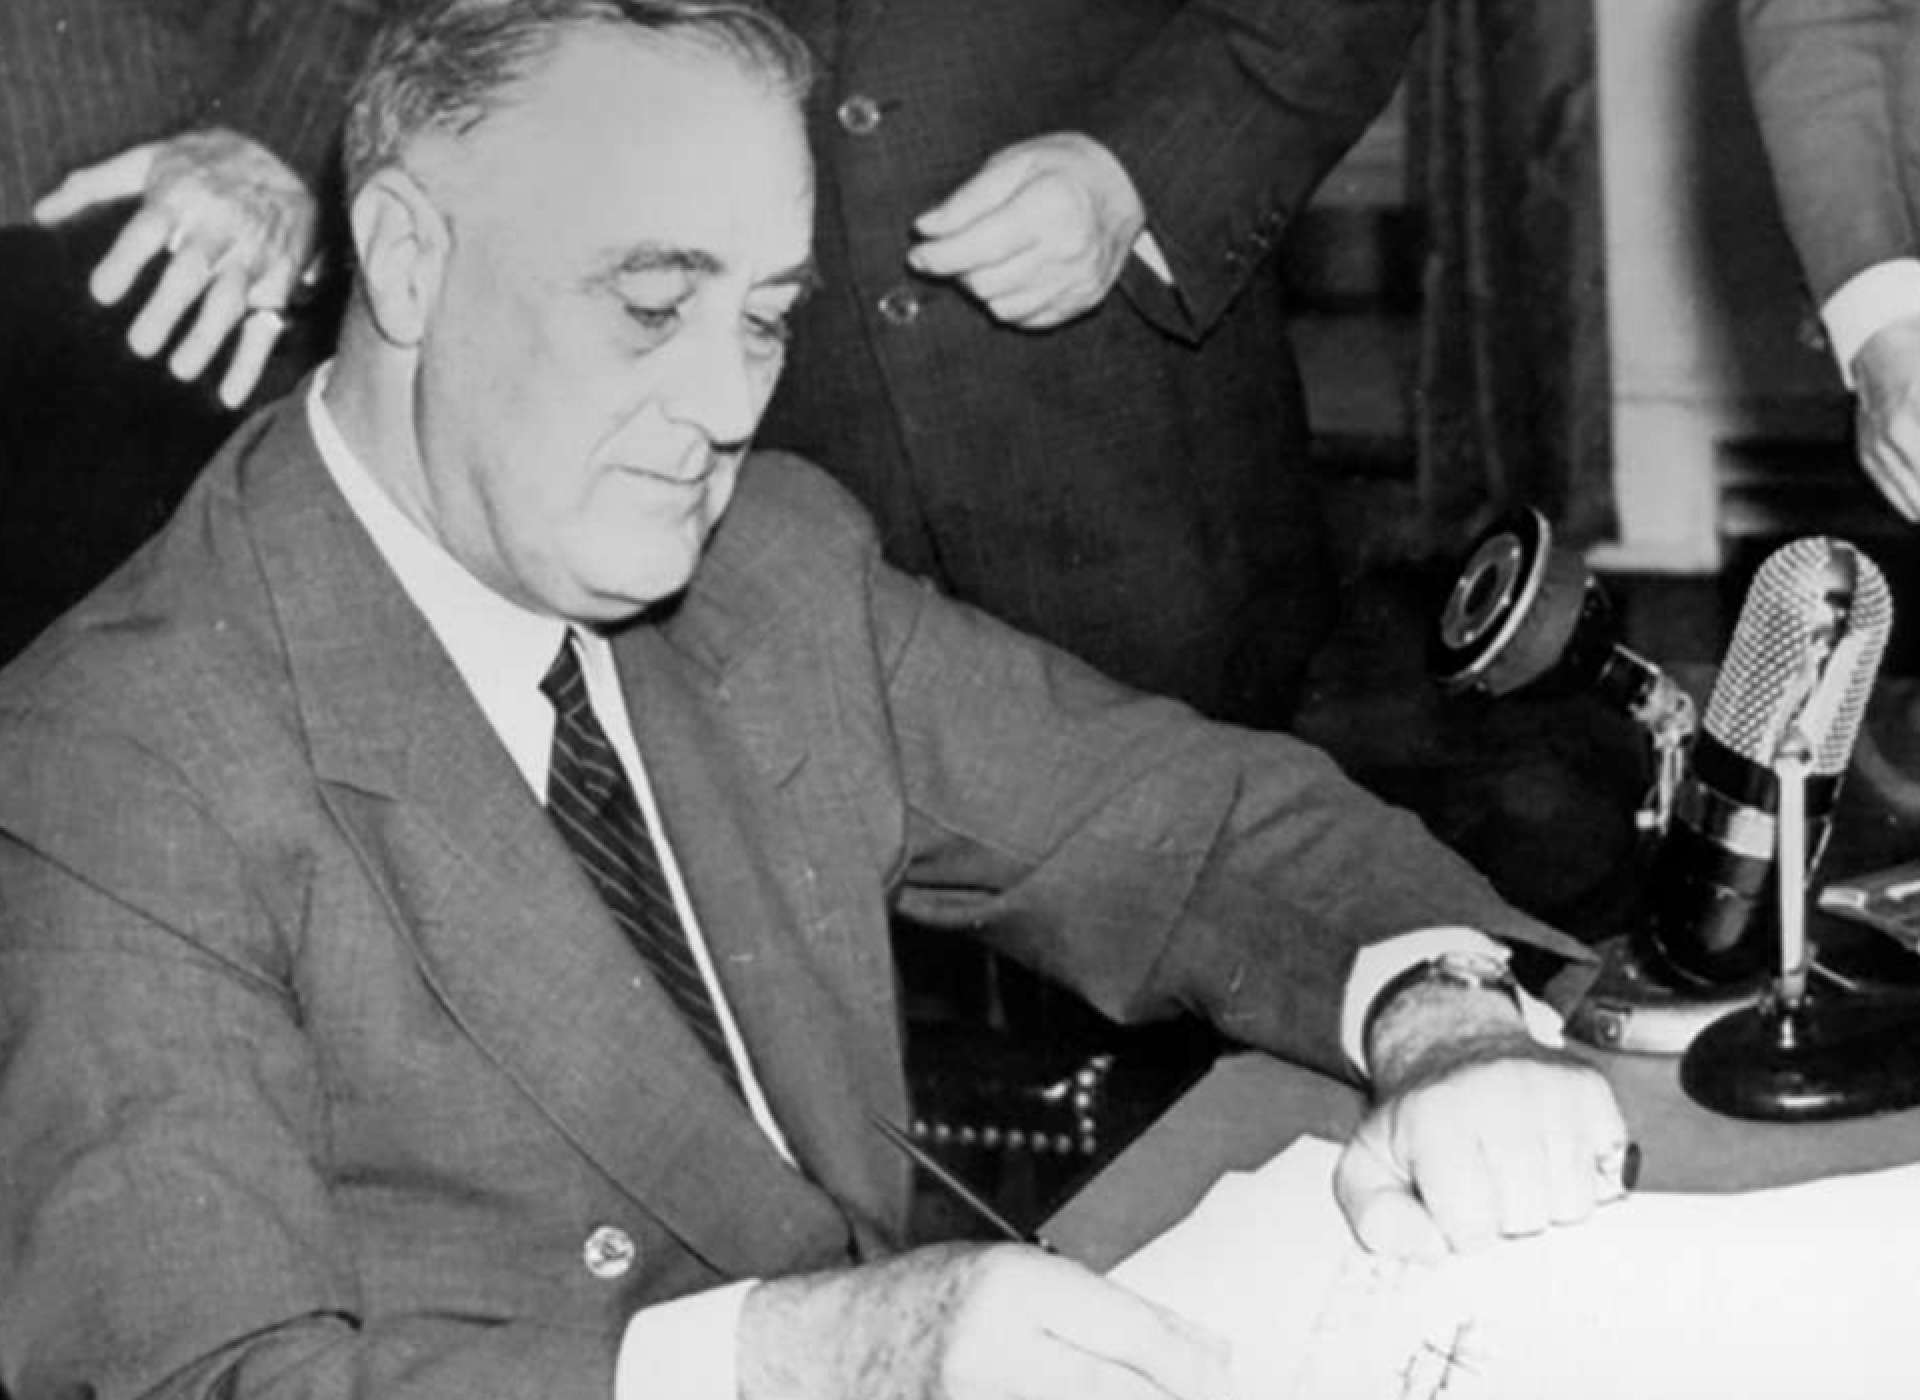 President Franklin D. Roosevelt signs the Selective Training and Service Act of 1940